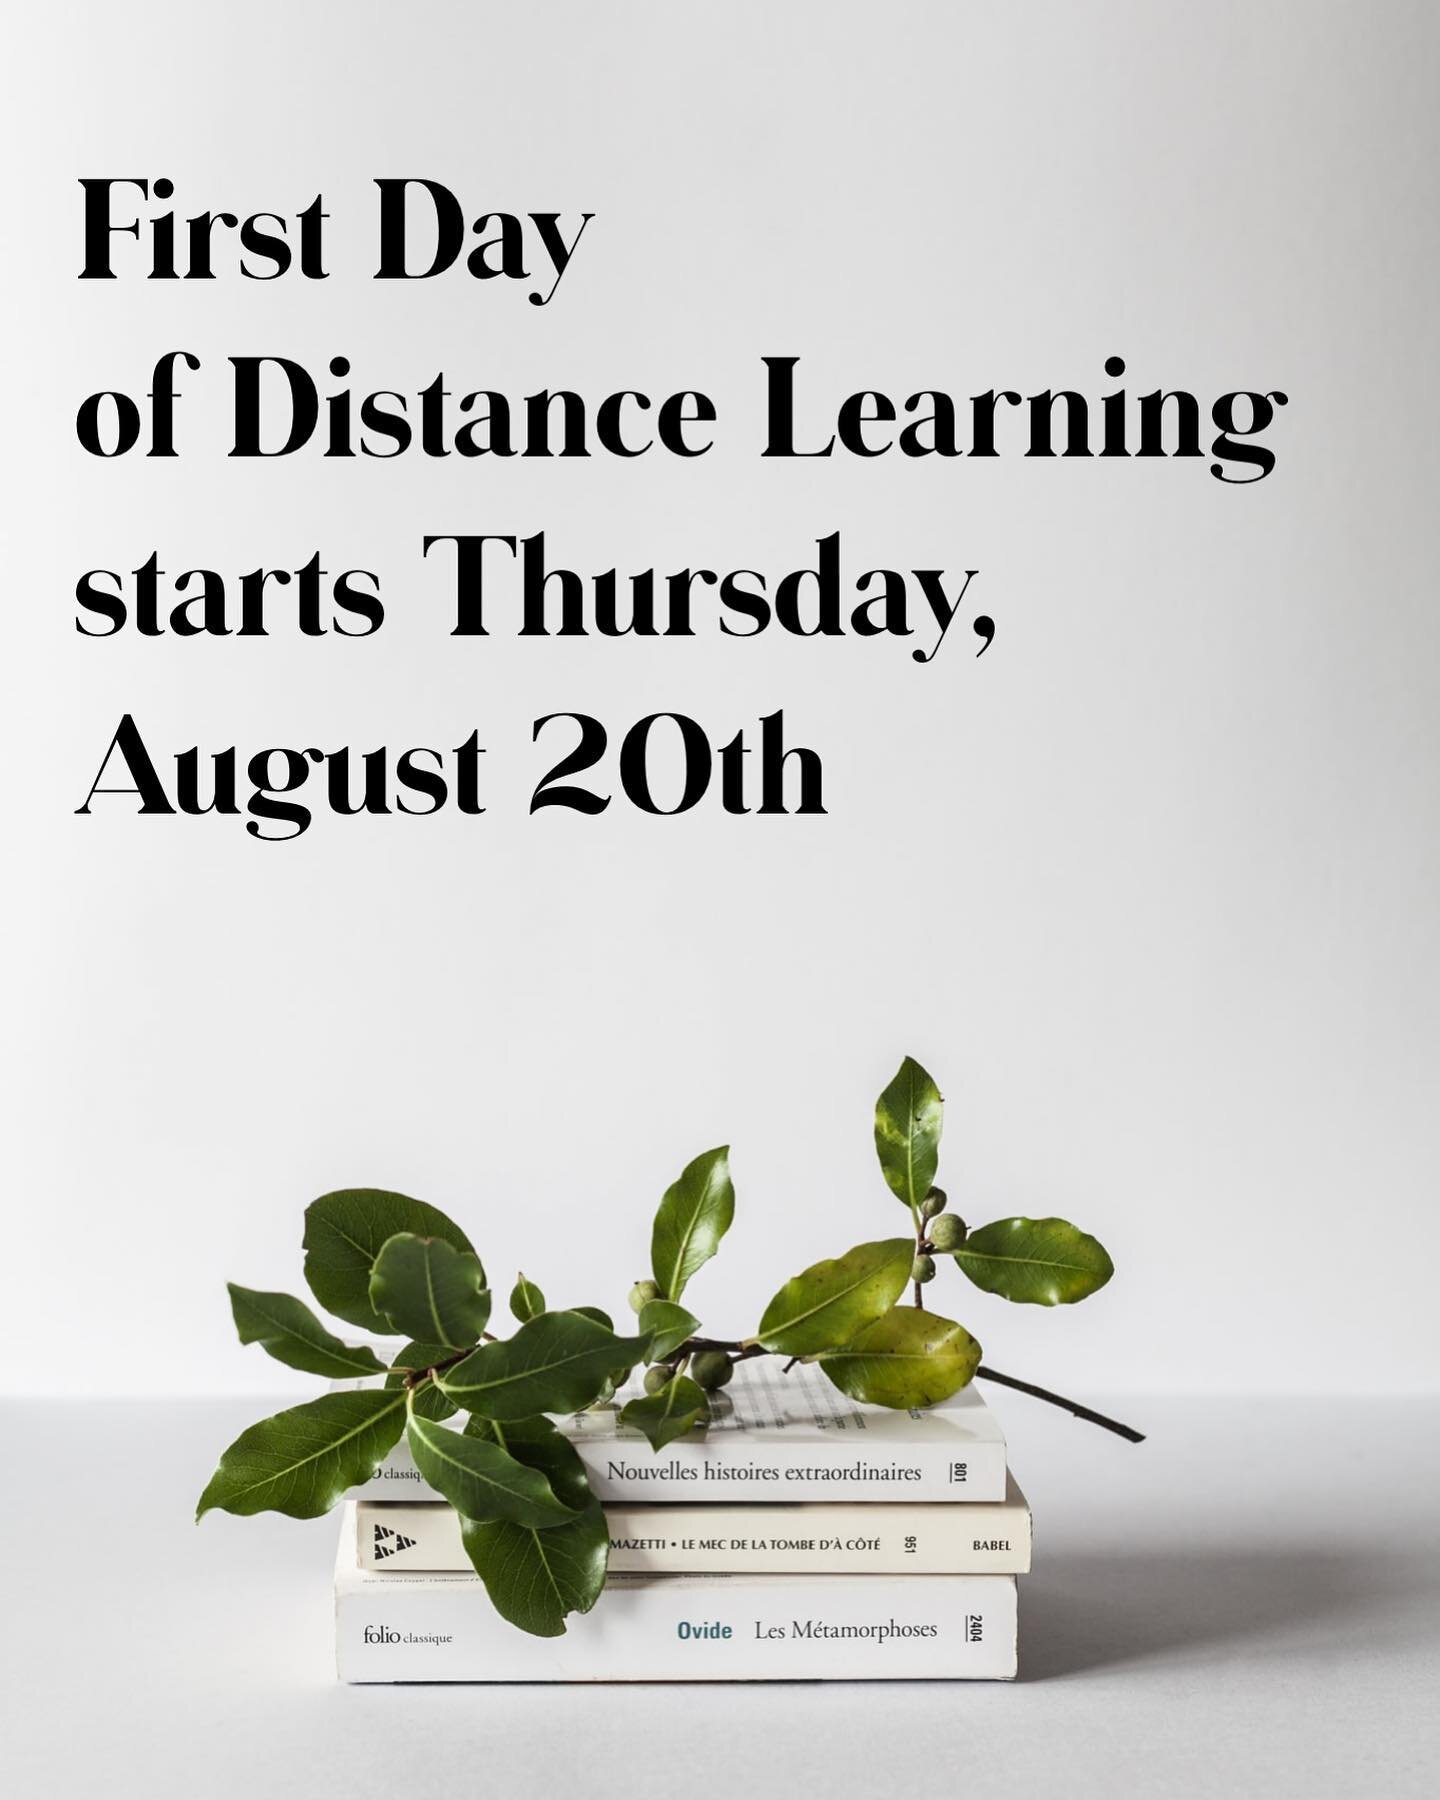 School officially started today, but the first day of instruction is Thursday. Don&rsquo;t let your student fall behind with distance learning and let us help!